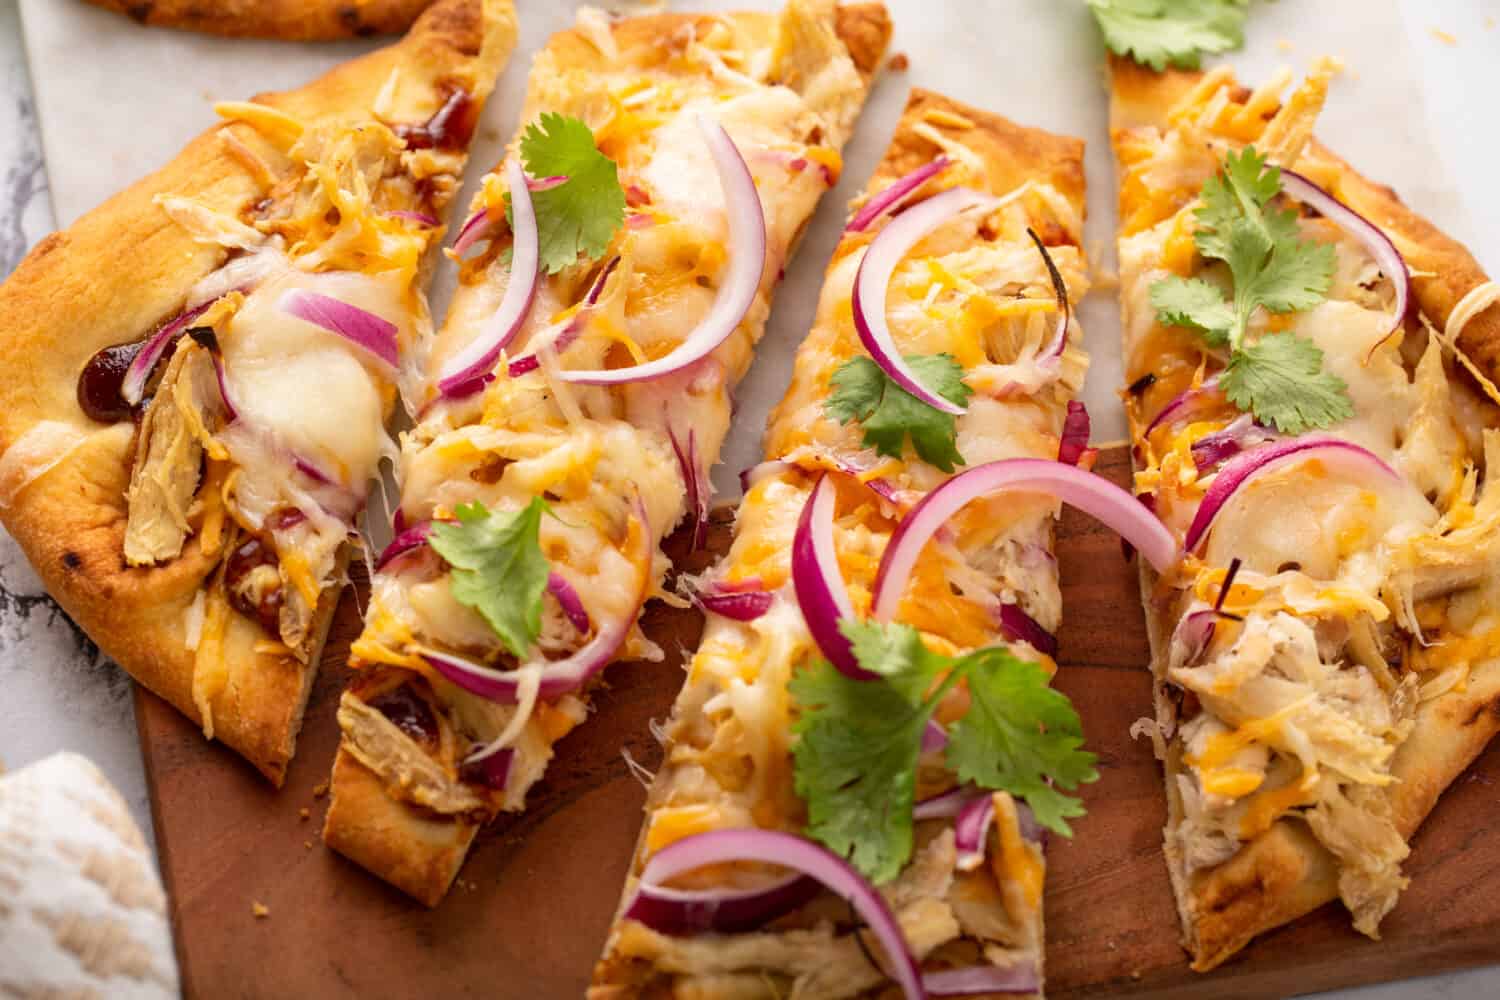 Barbeque chicken flatbread with BBQ sauce, cheese and red onion